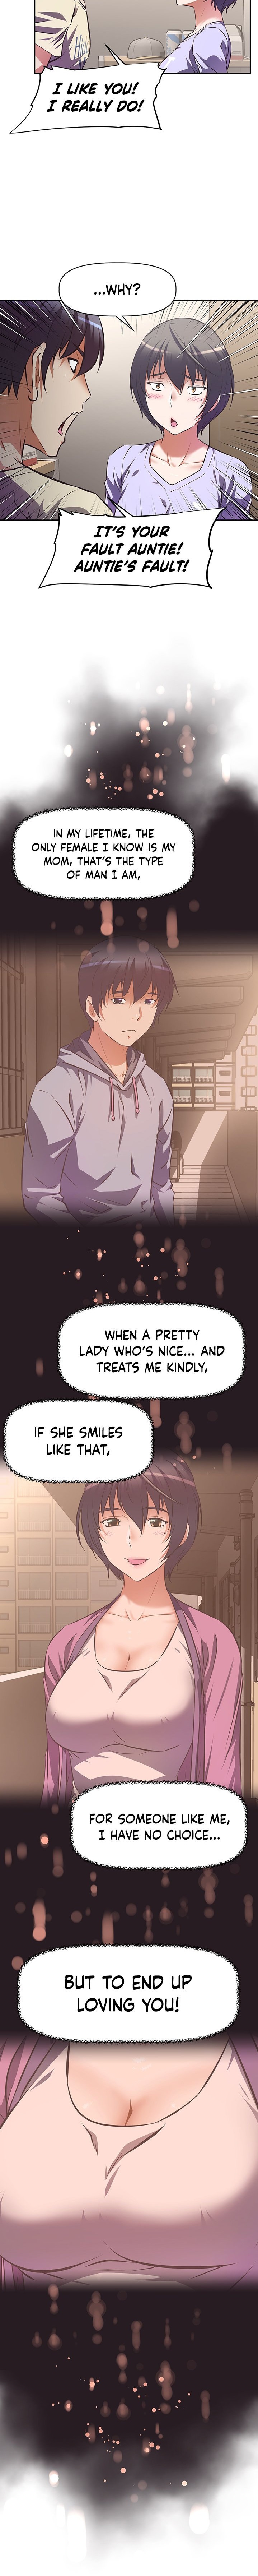 Streamer Aunt - Chapter 2 Page 13